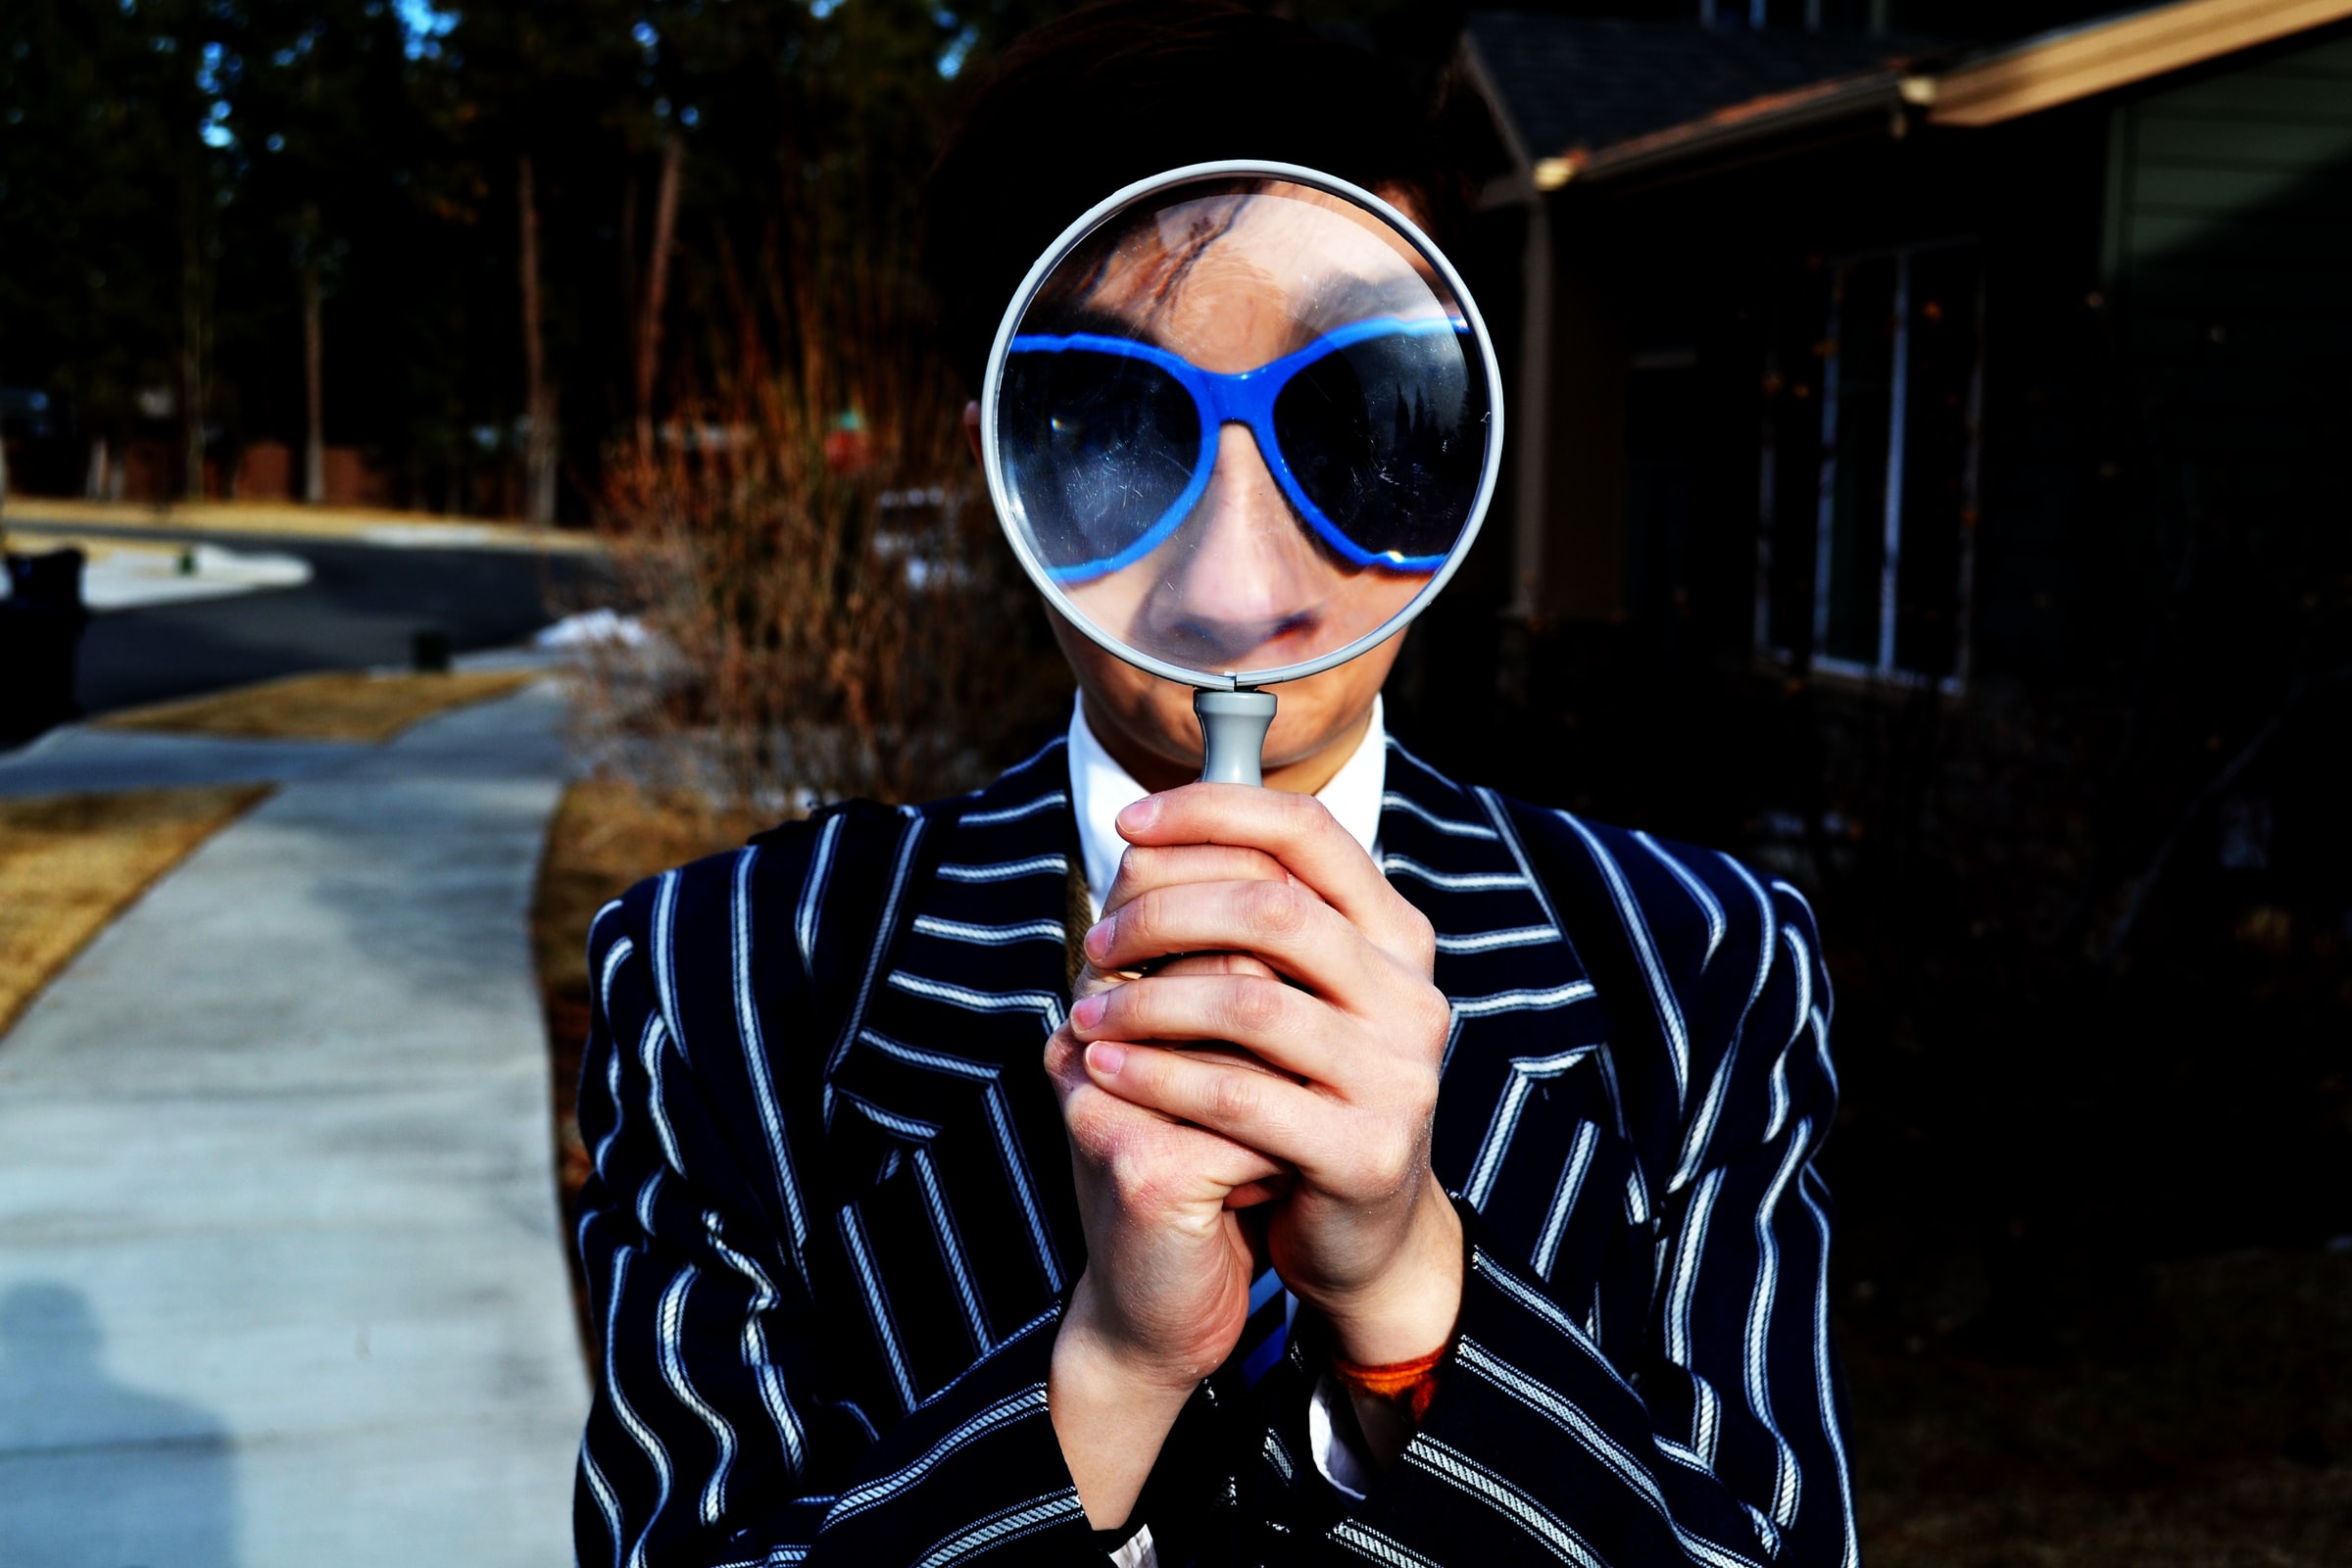 A person holds up a magnifying glass in front of their face.